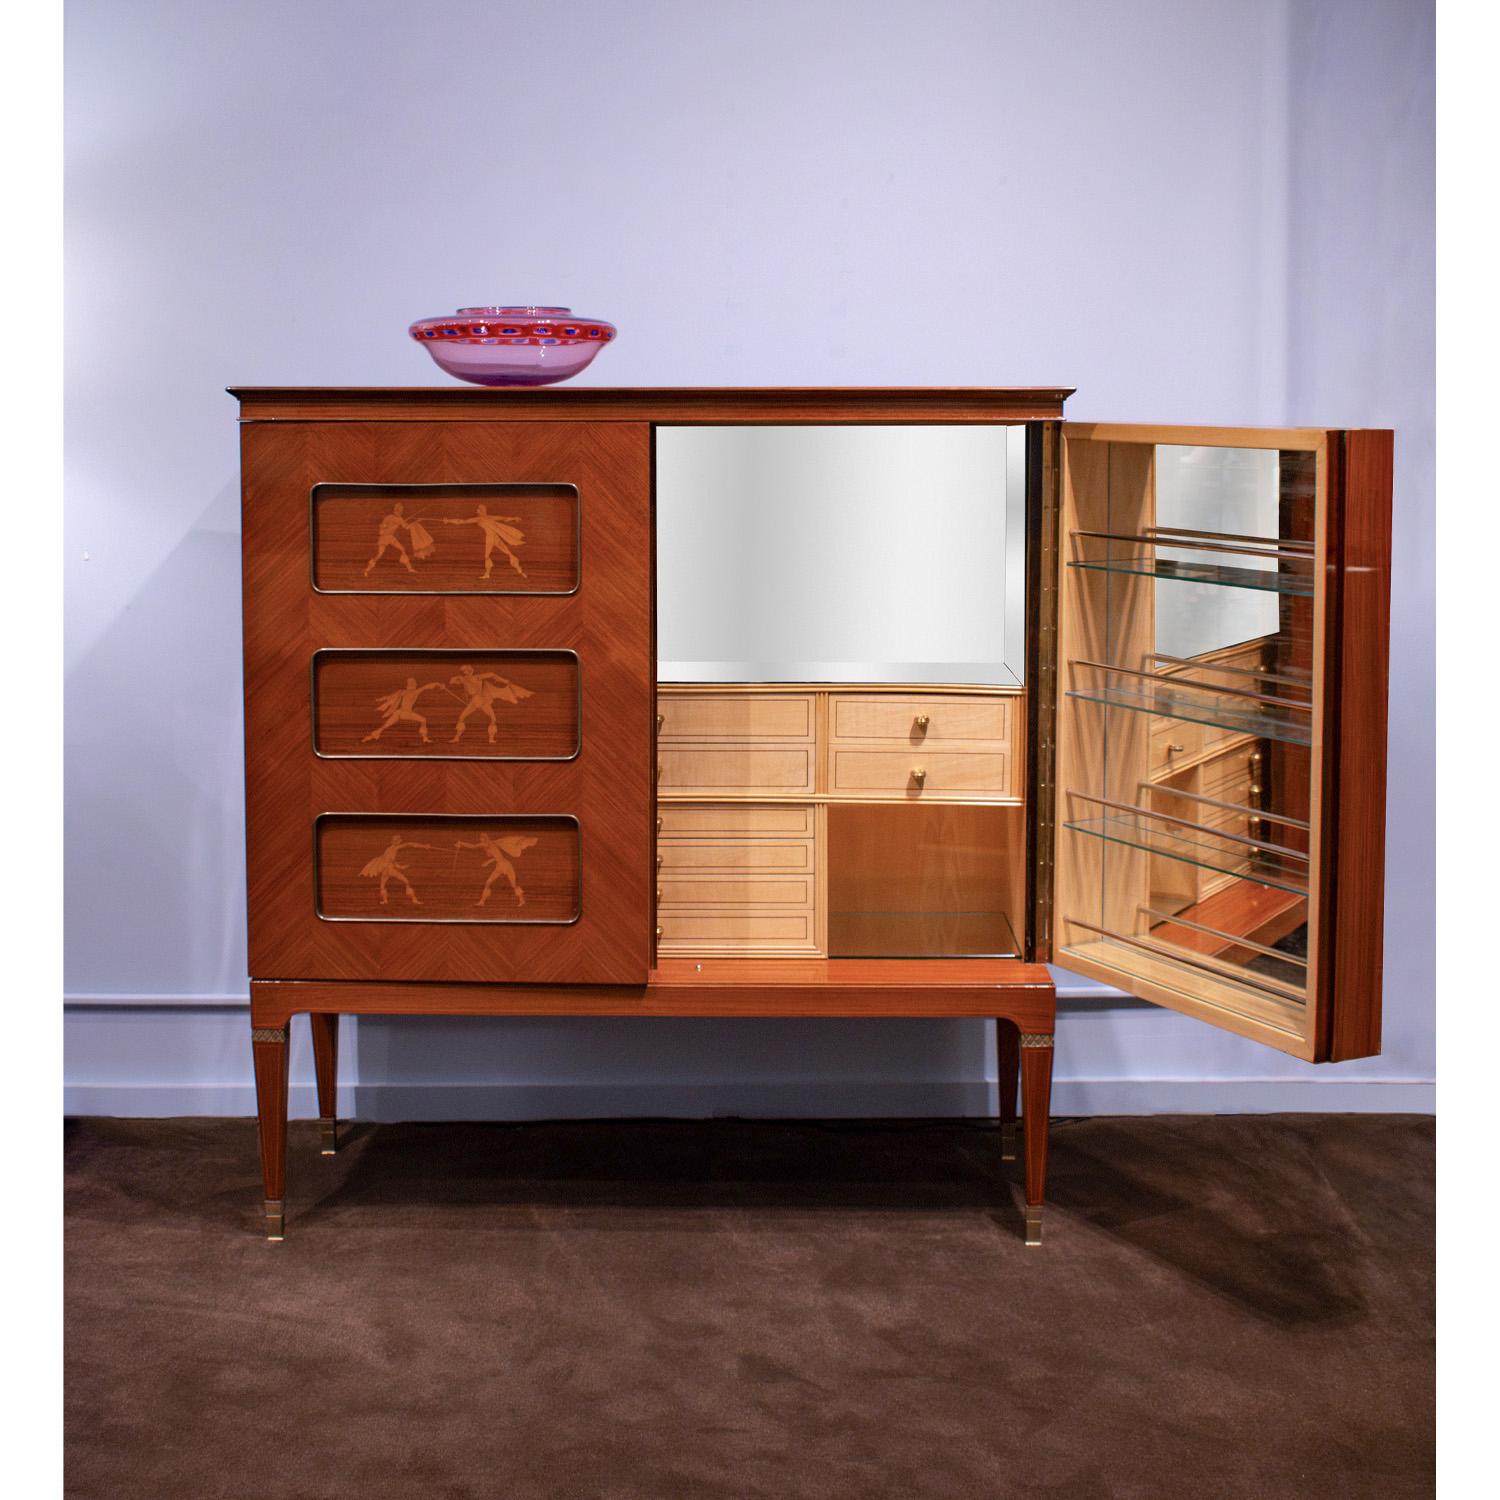 Paolo Buffa Exceptional Liquor Cabinet with Intricate Inlays 1950s For Sale 1